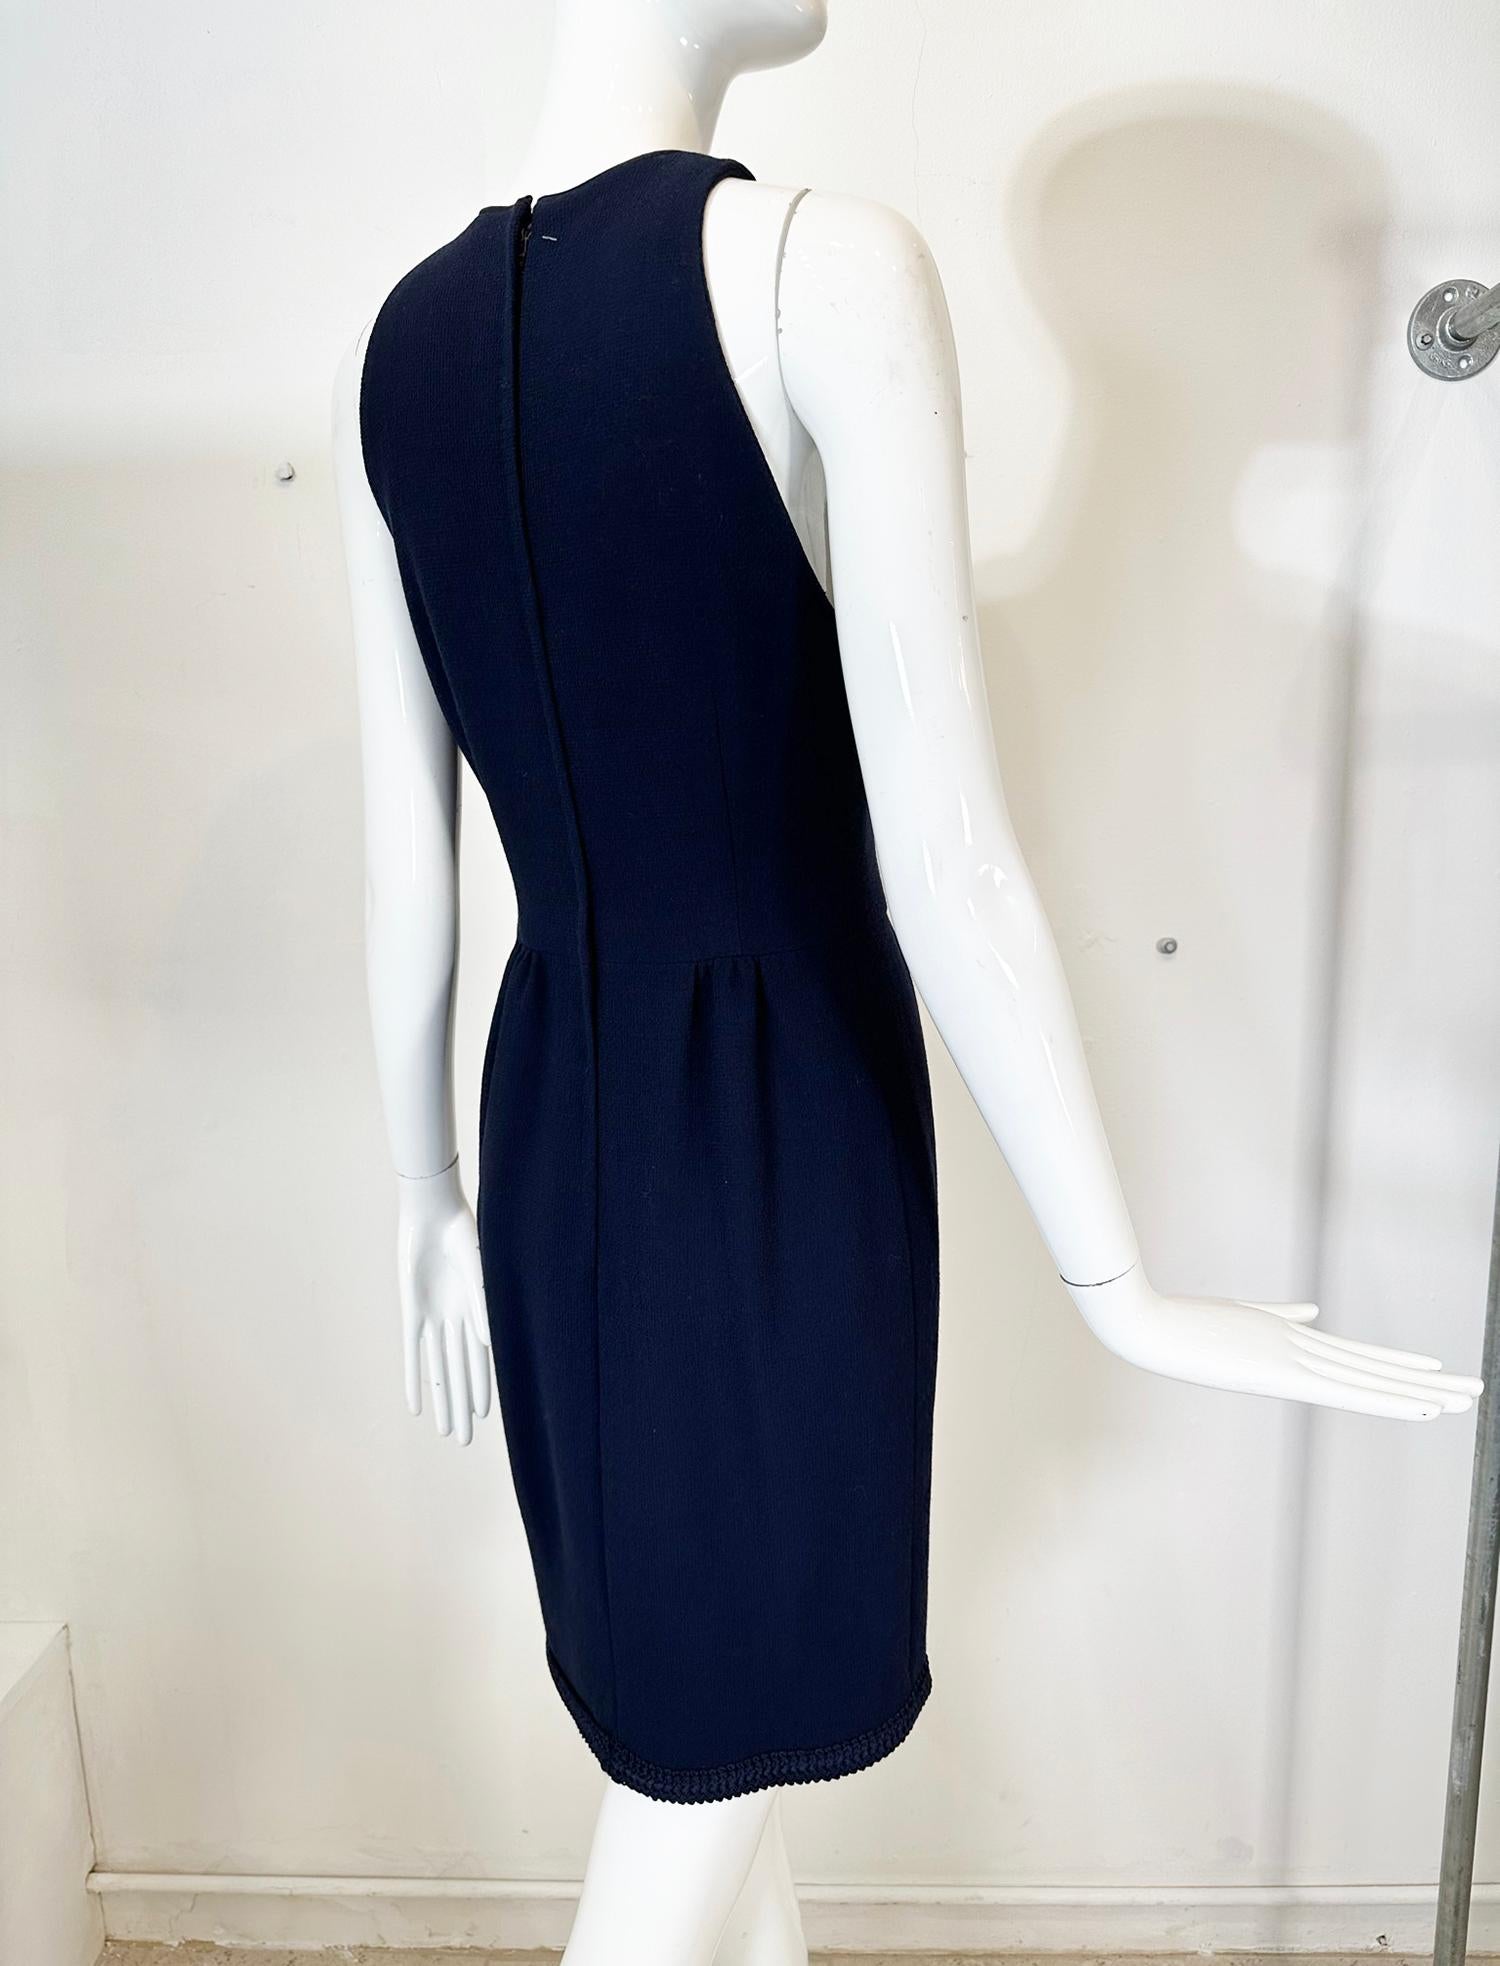 Irene Galitzine Couture Navy Blue Racer Neck Fitted Sheath Braid Trim Dress 1960 For Sale 1